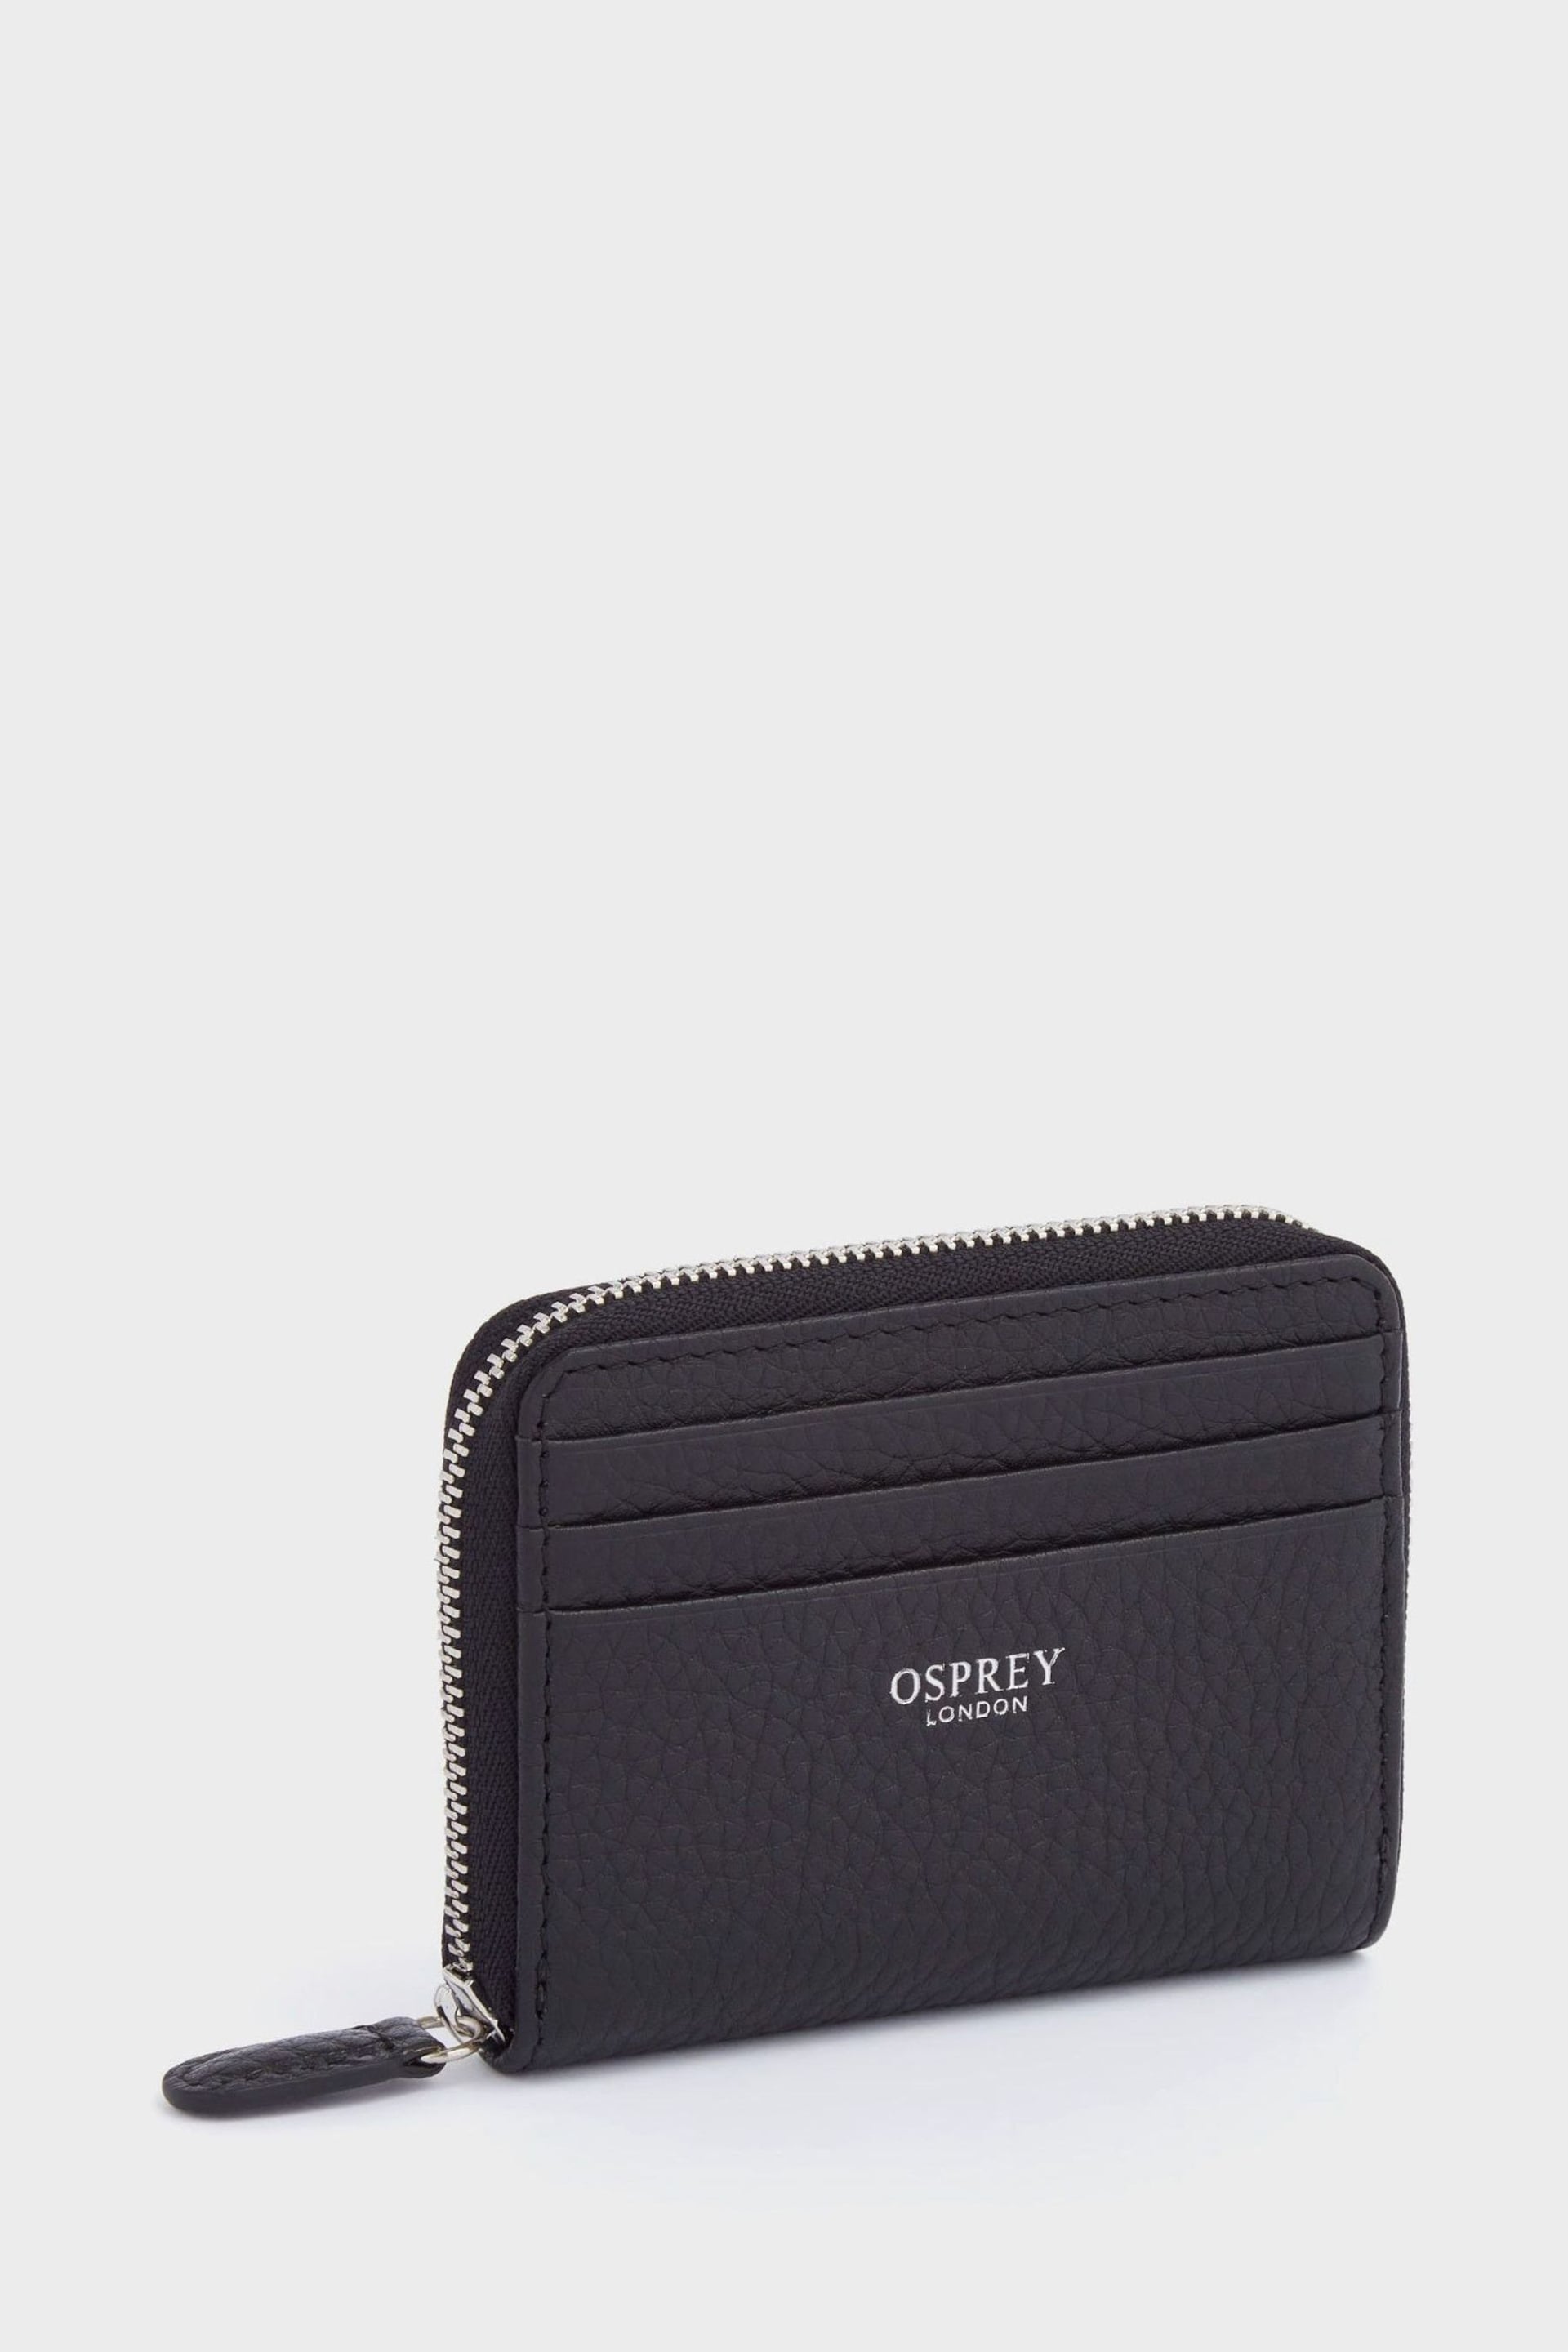 OSPREY LONDON Small The Lyra Leather RFID Zip  Purse - Image 3 of 5